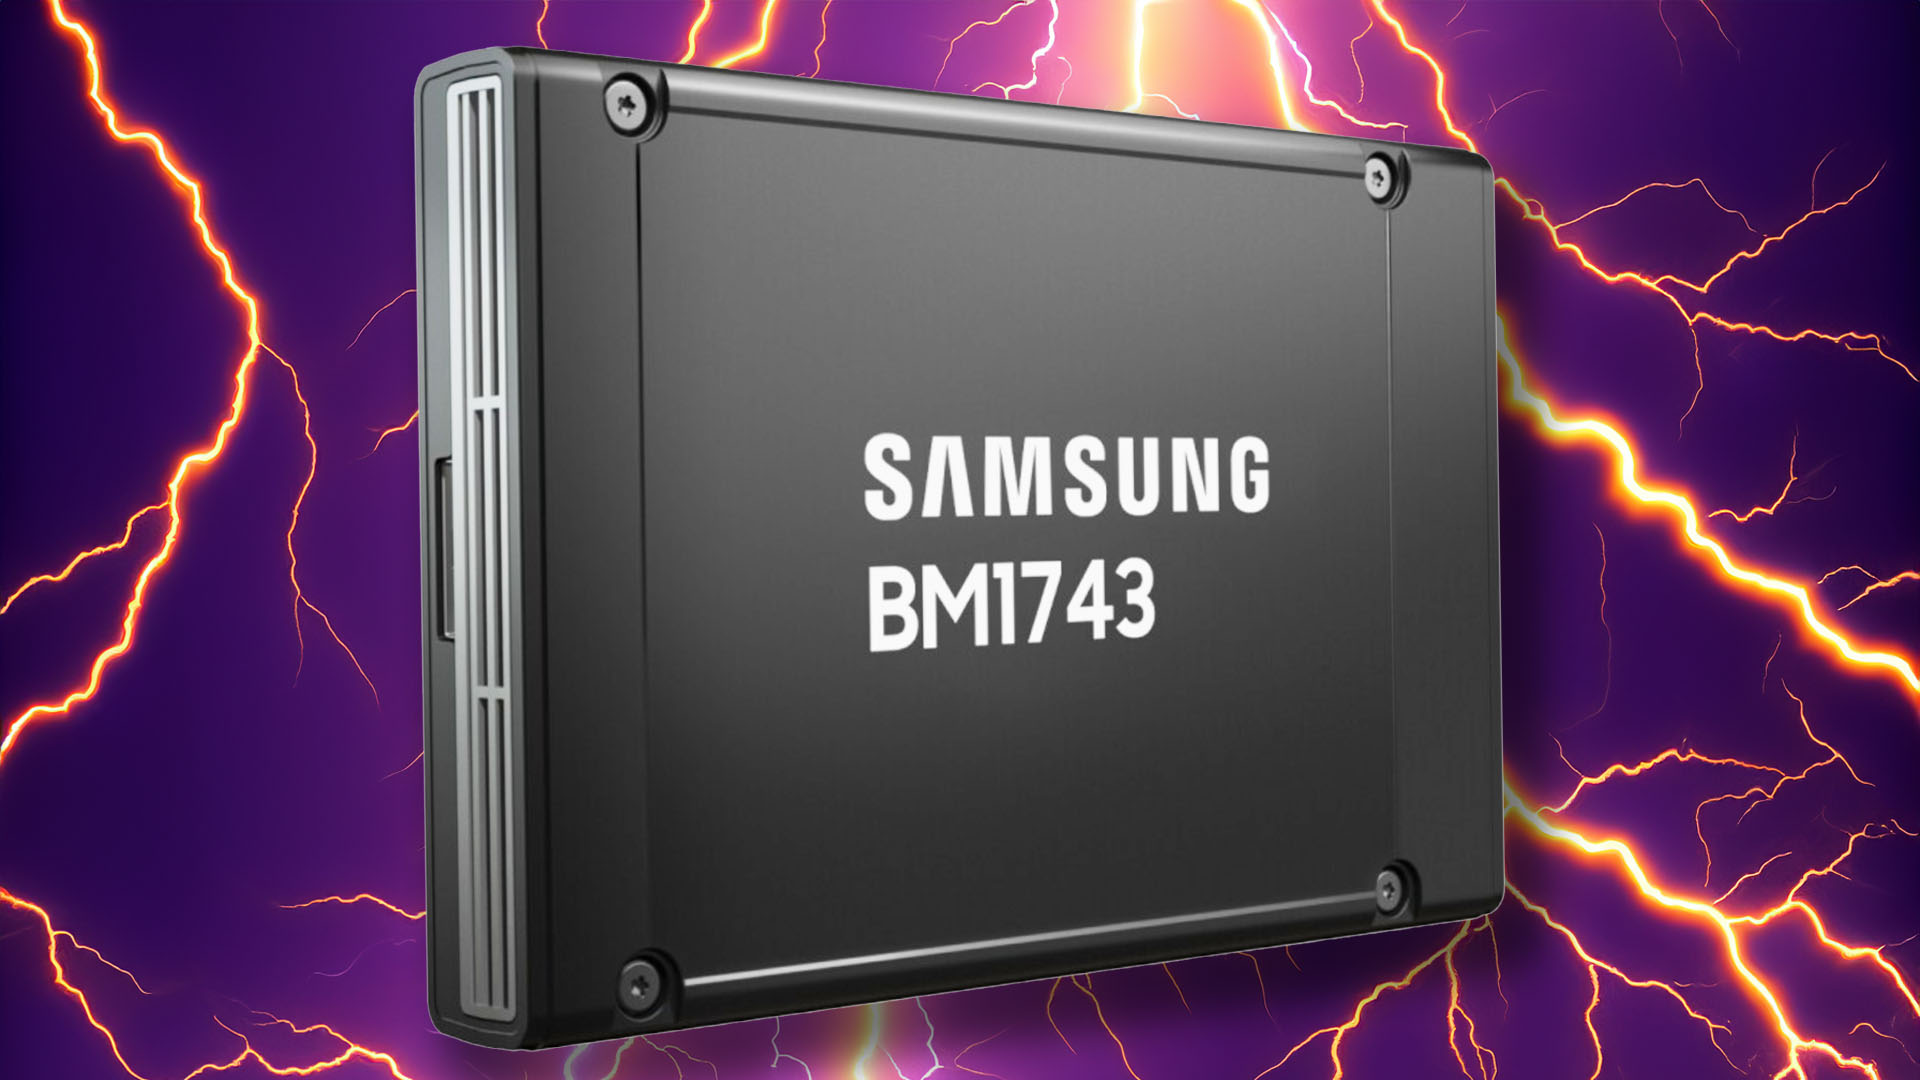 Samsung just dropped a 61TB SSD, says it could make a 122TB drive